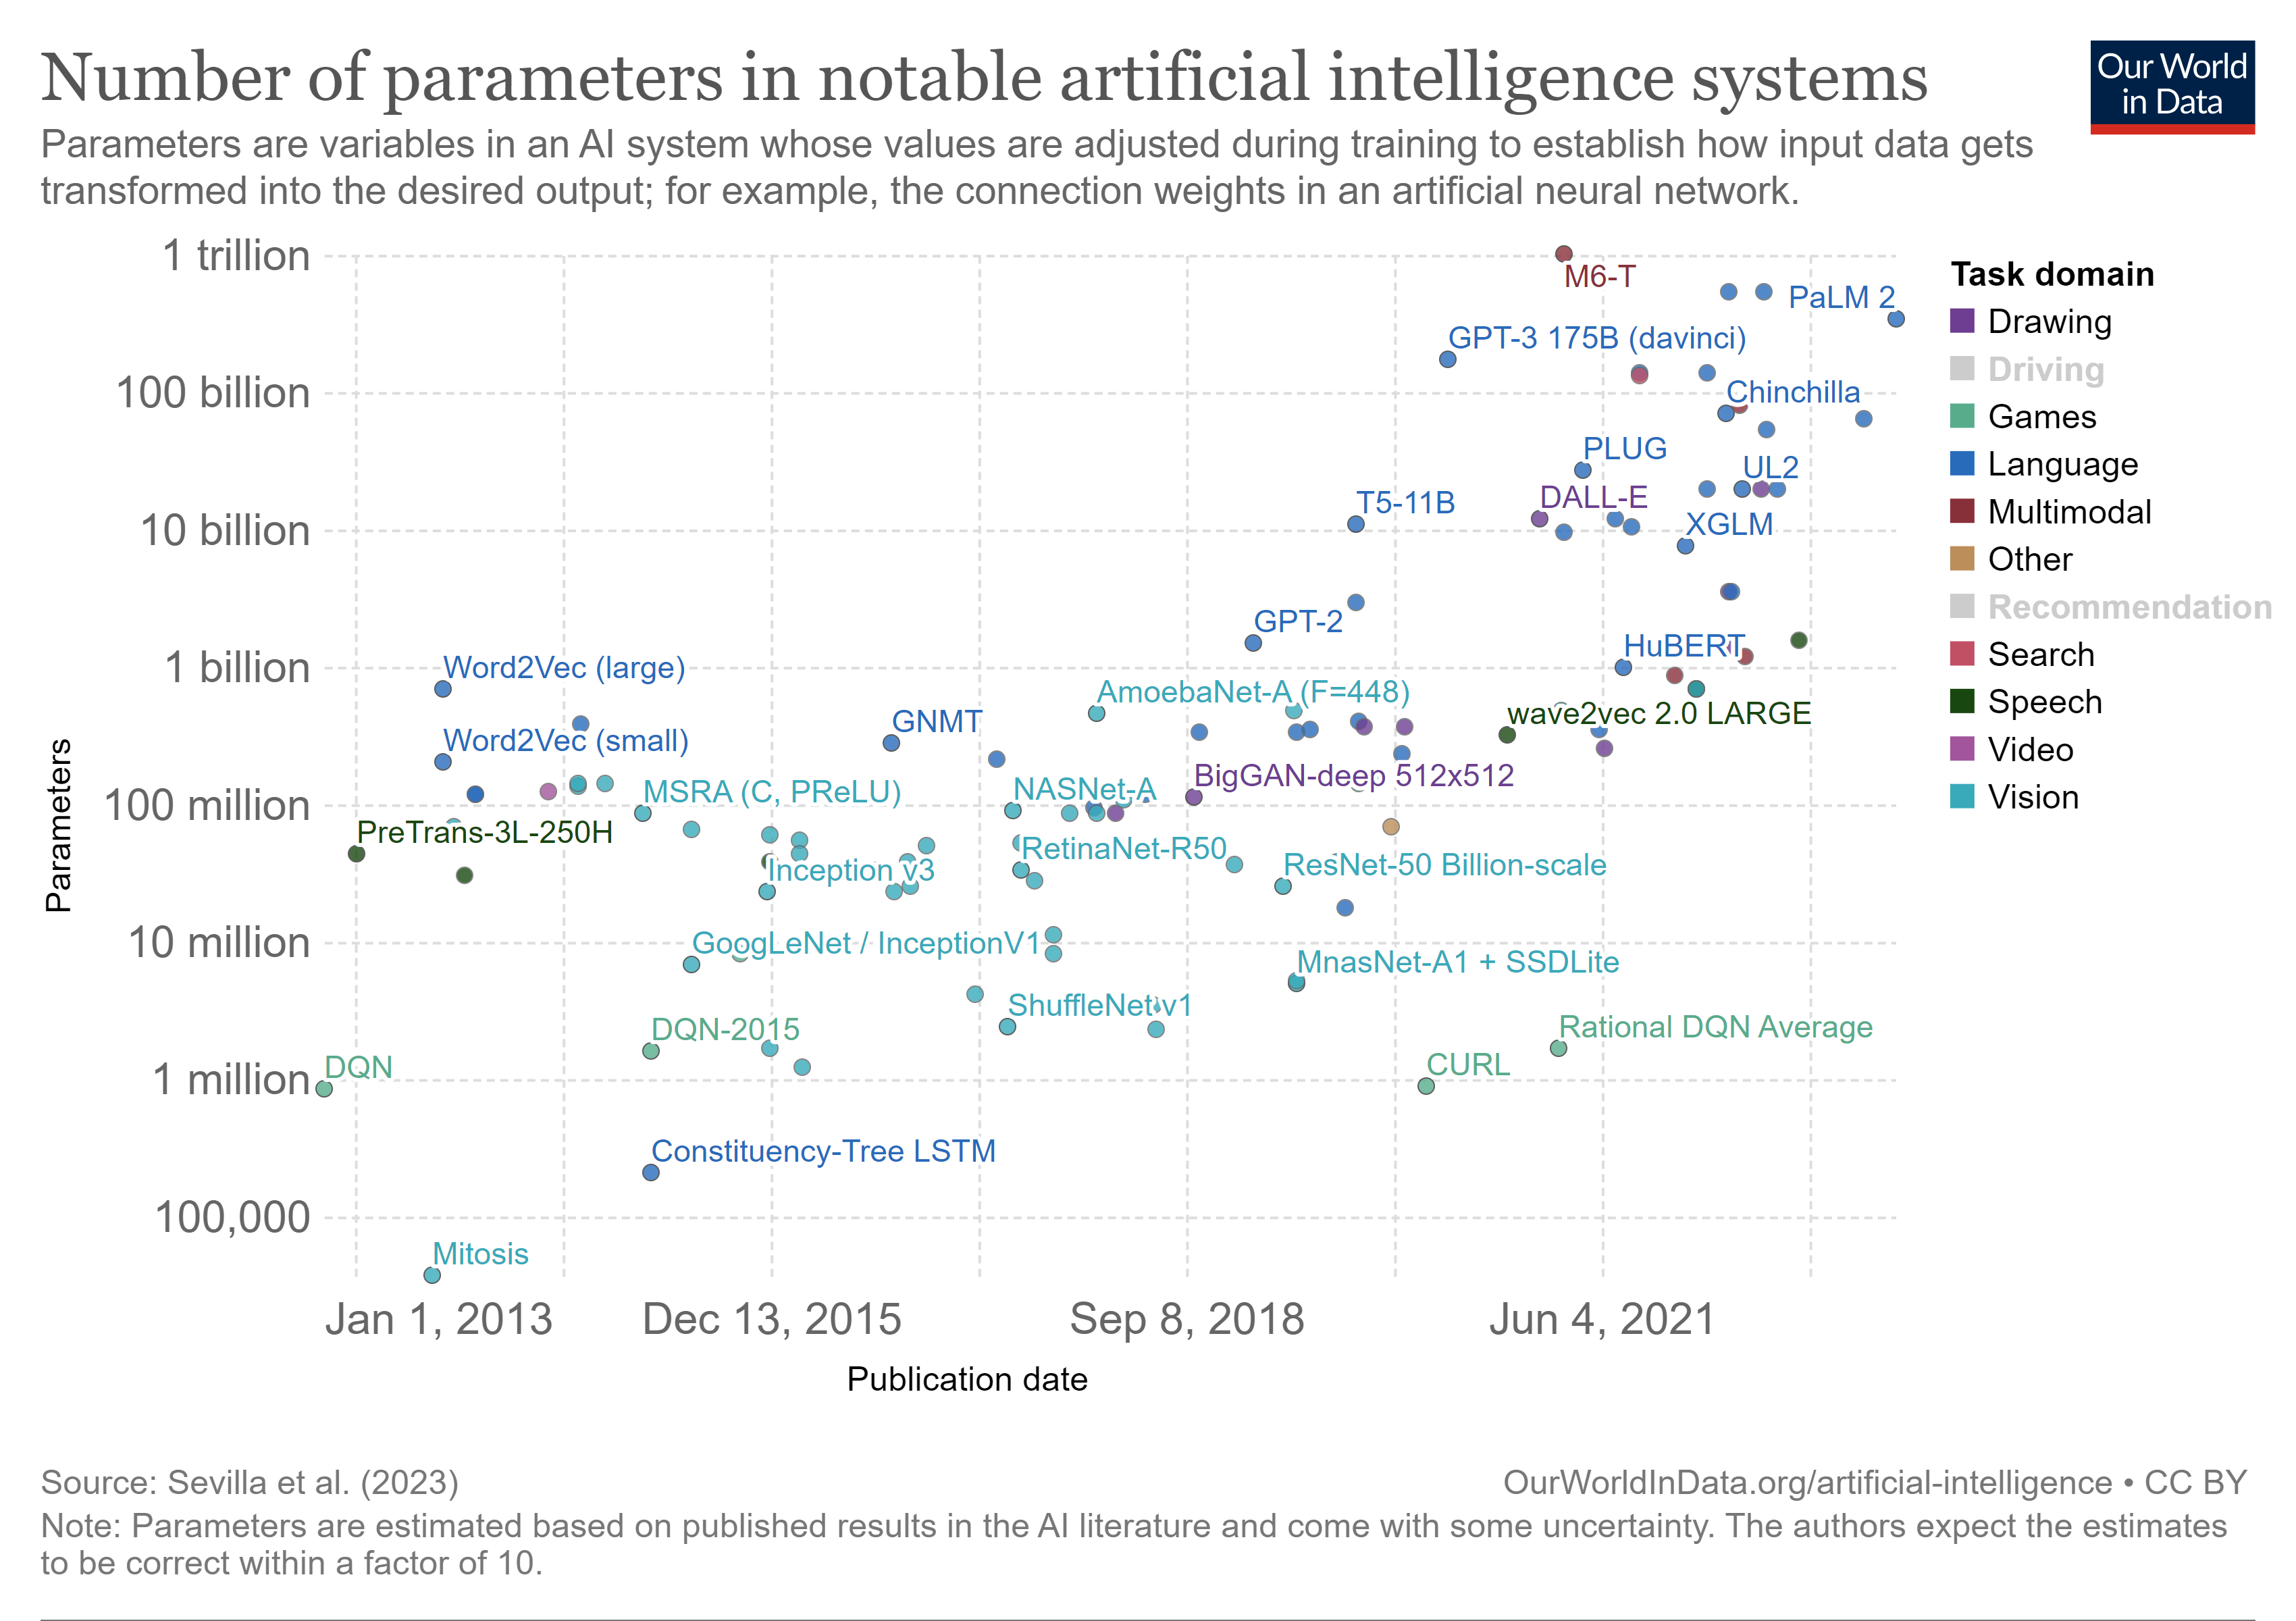 Number of parameters in notable AI systems